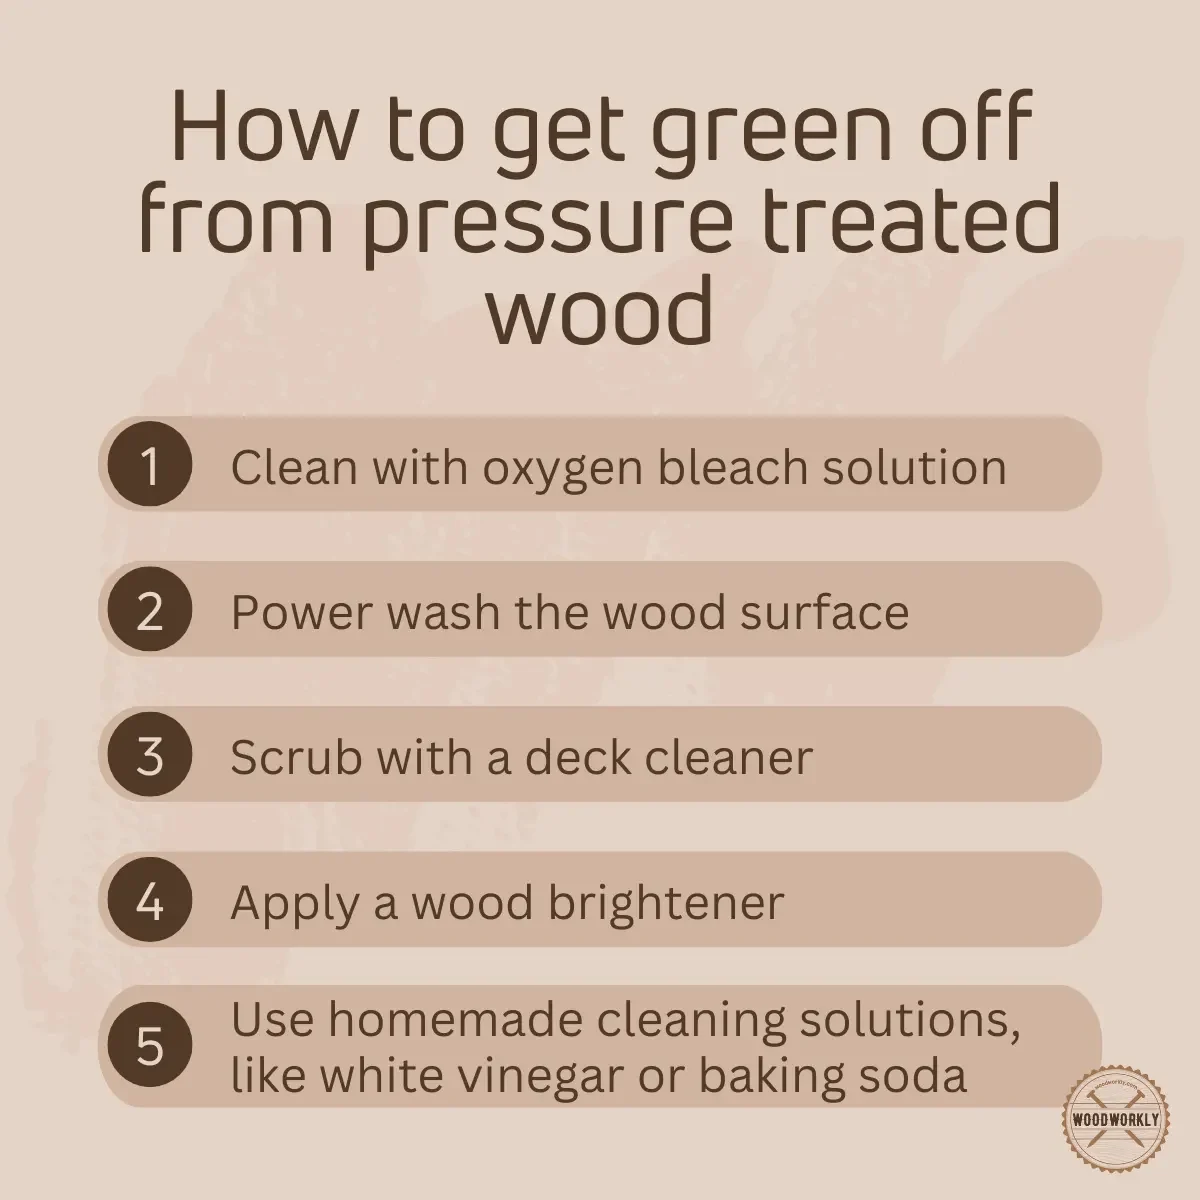 How to get green off from pressure treated wood